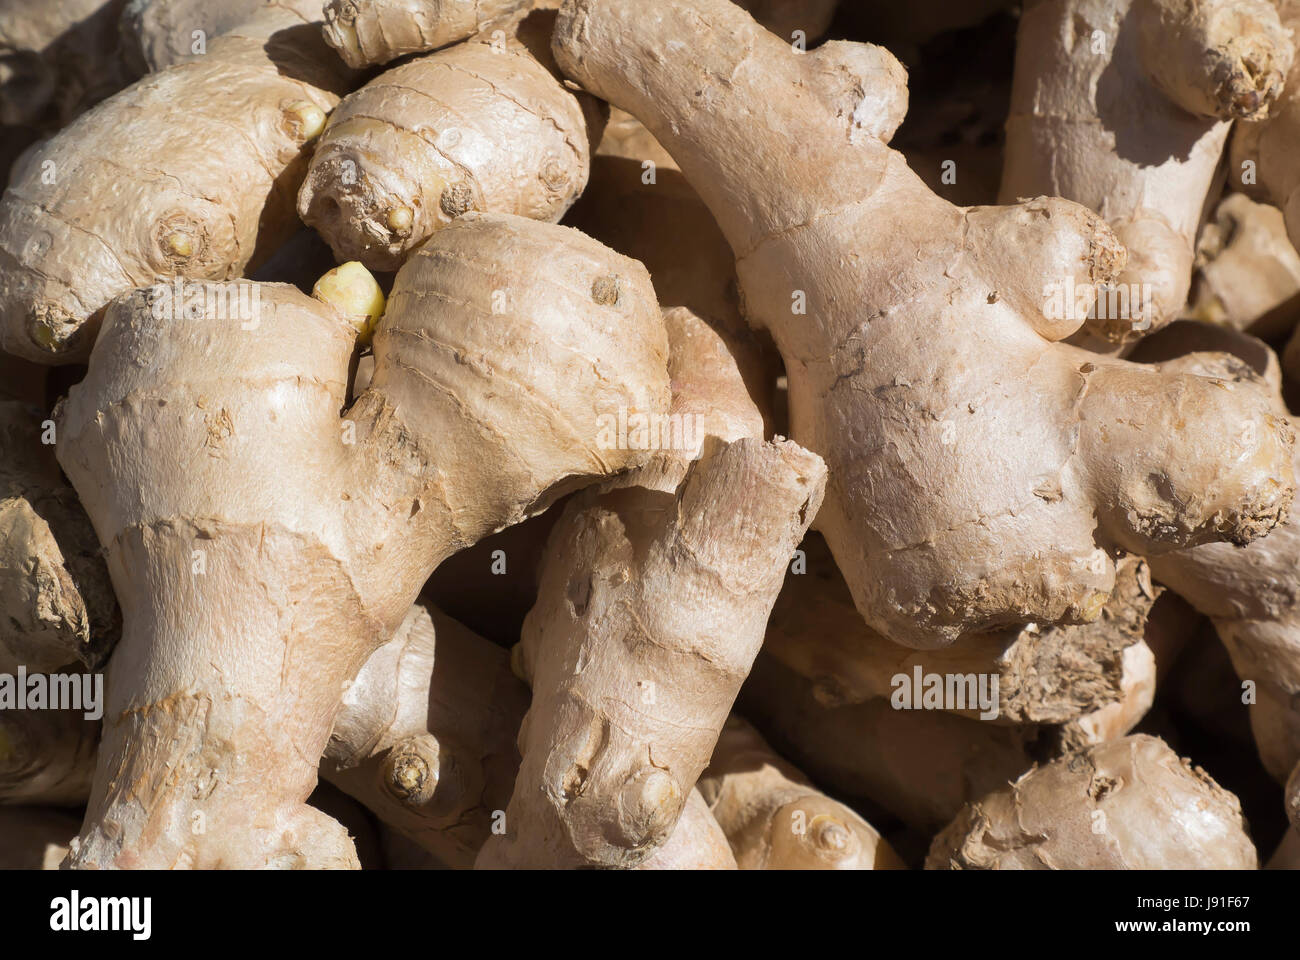 Ginger - Close Up Stock Photo